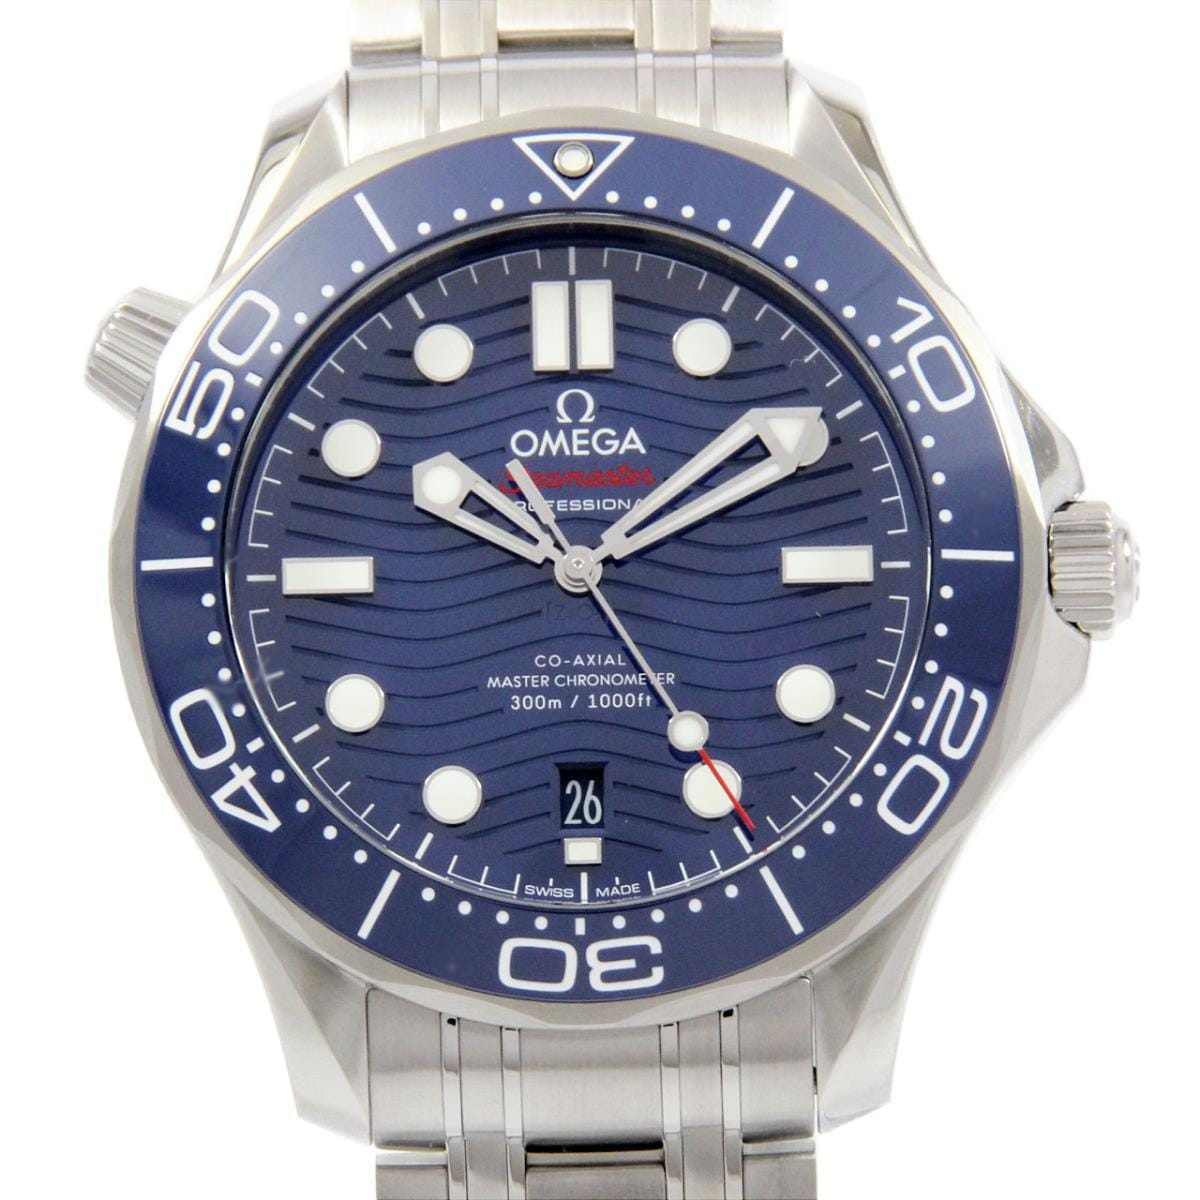 [BRAND NEW] Omega 210.30.42.20.03.001 Seamaster Diver 300M Automatic